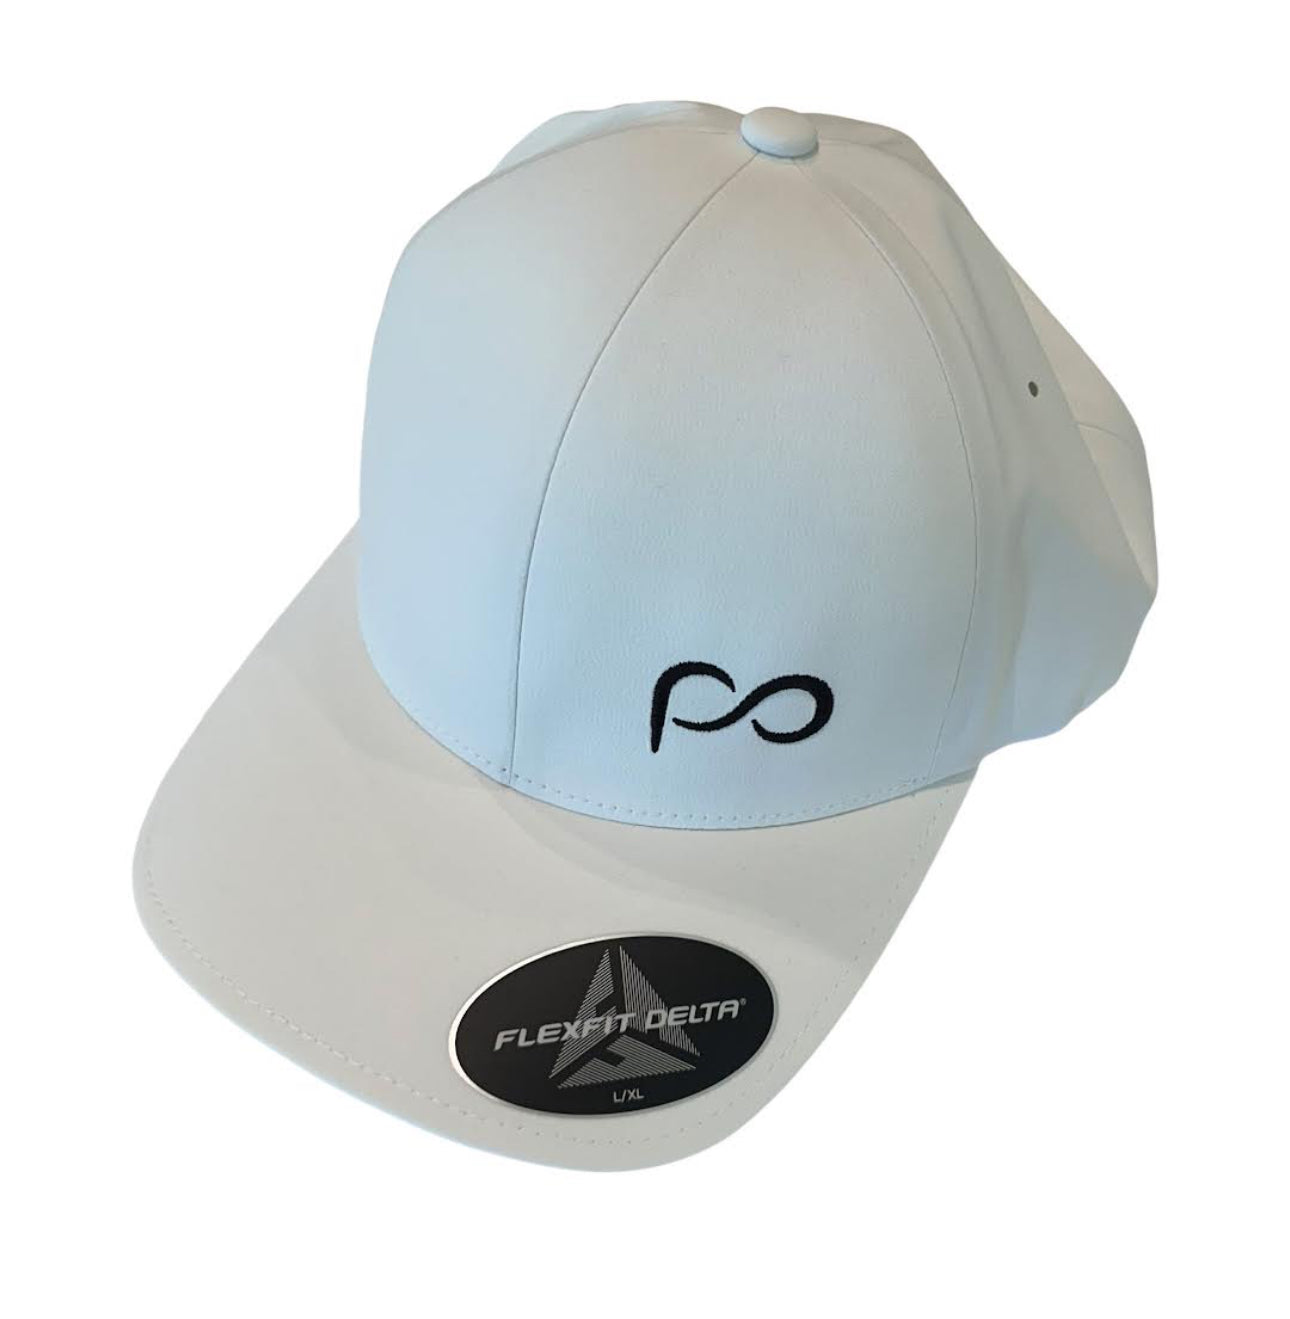 White Curved Bill Cap with Black Small Front PO Logo